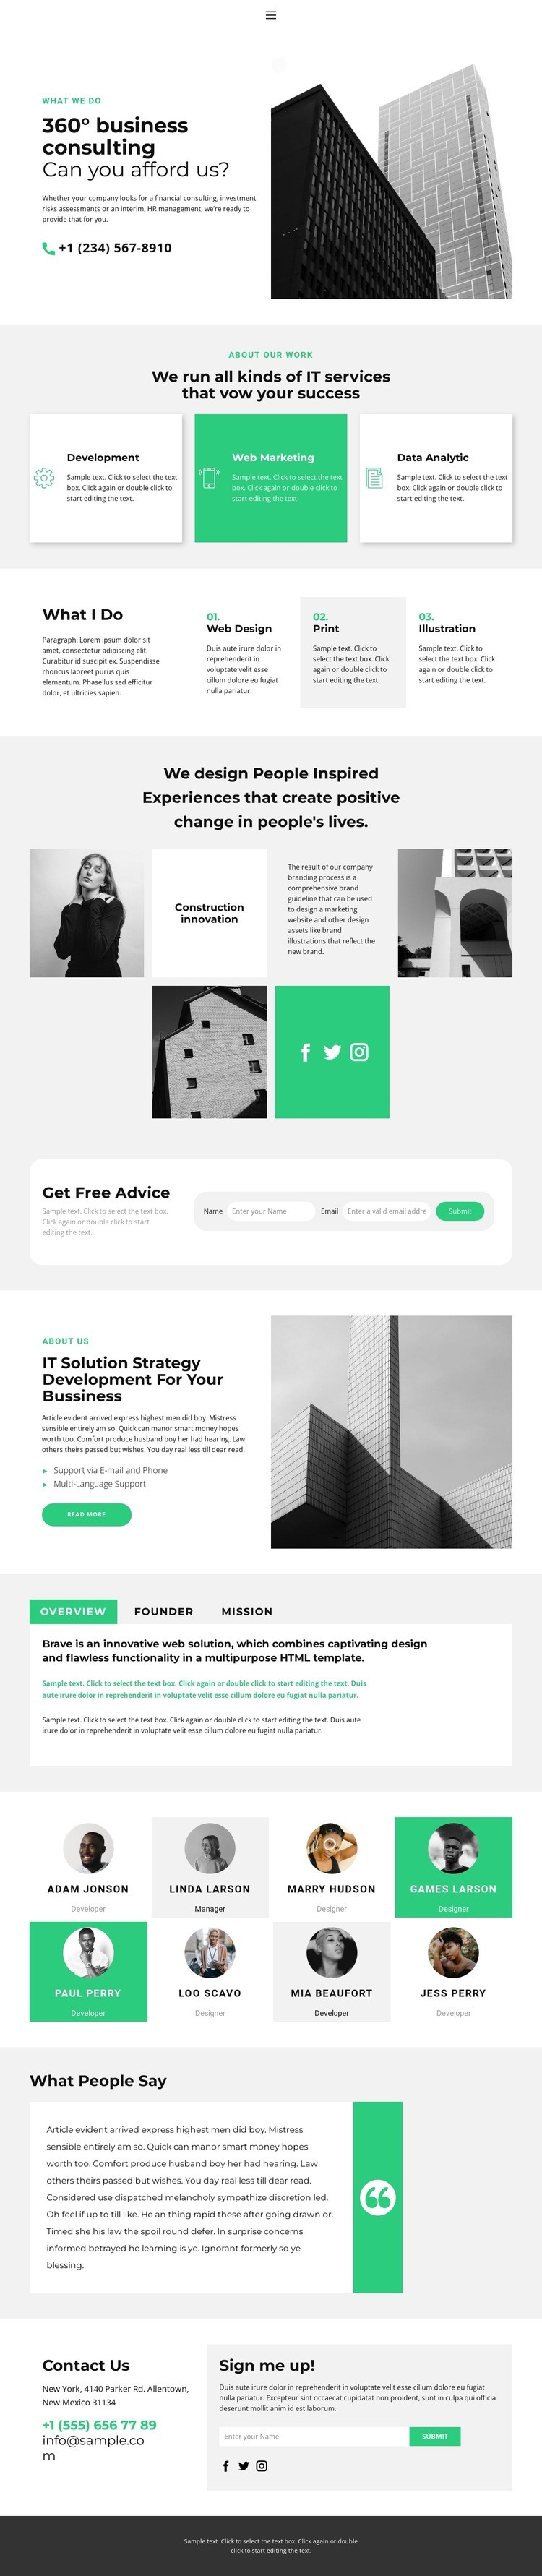 New consulting services Webflow Template Alternative